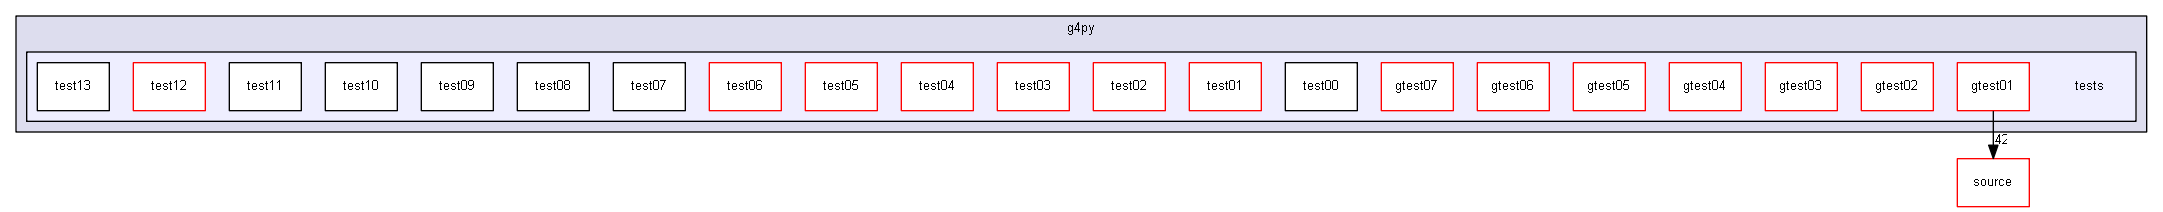 D:/Geant4/geant4_9_6_p02/environments/g4py/tests